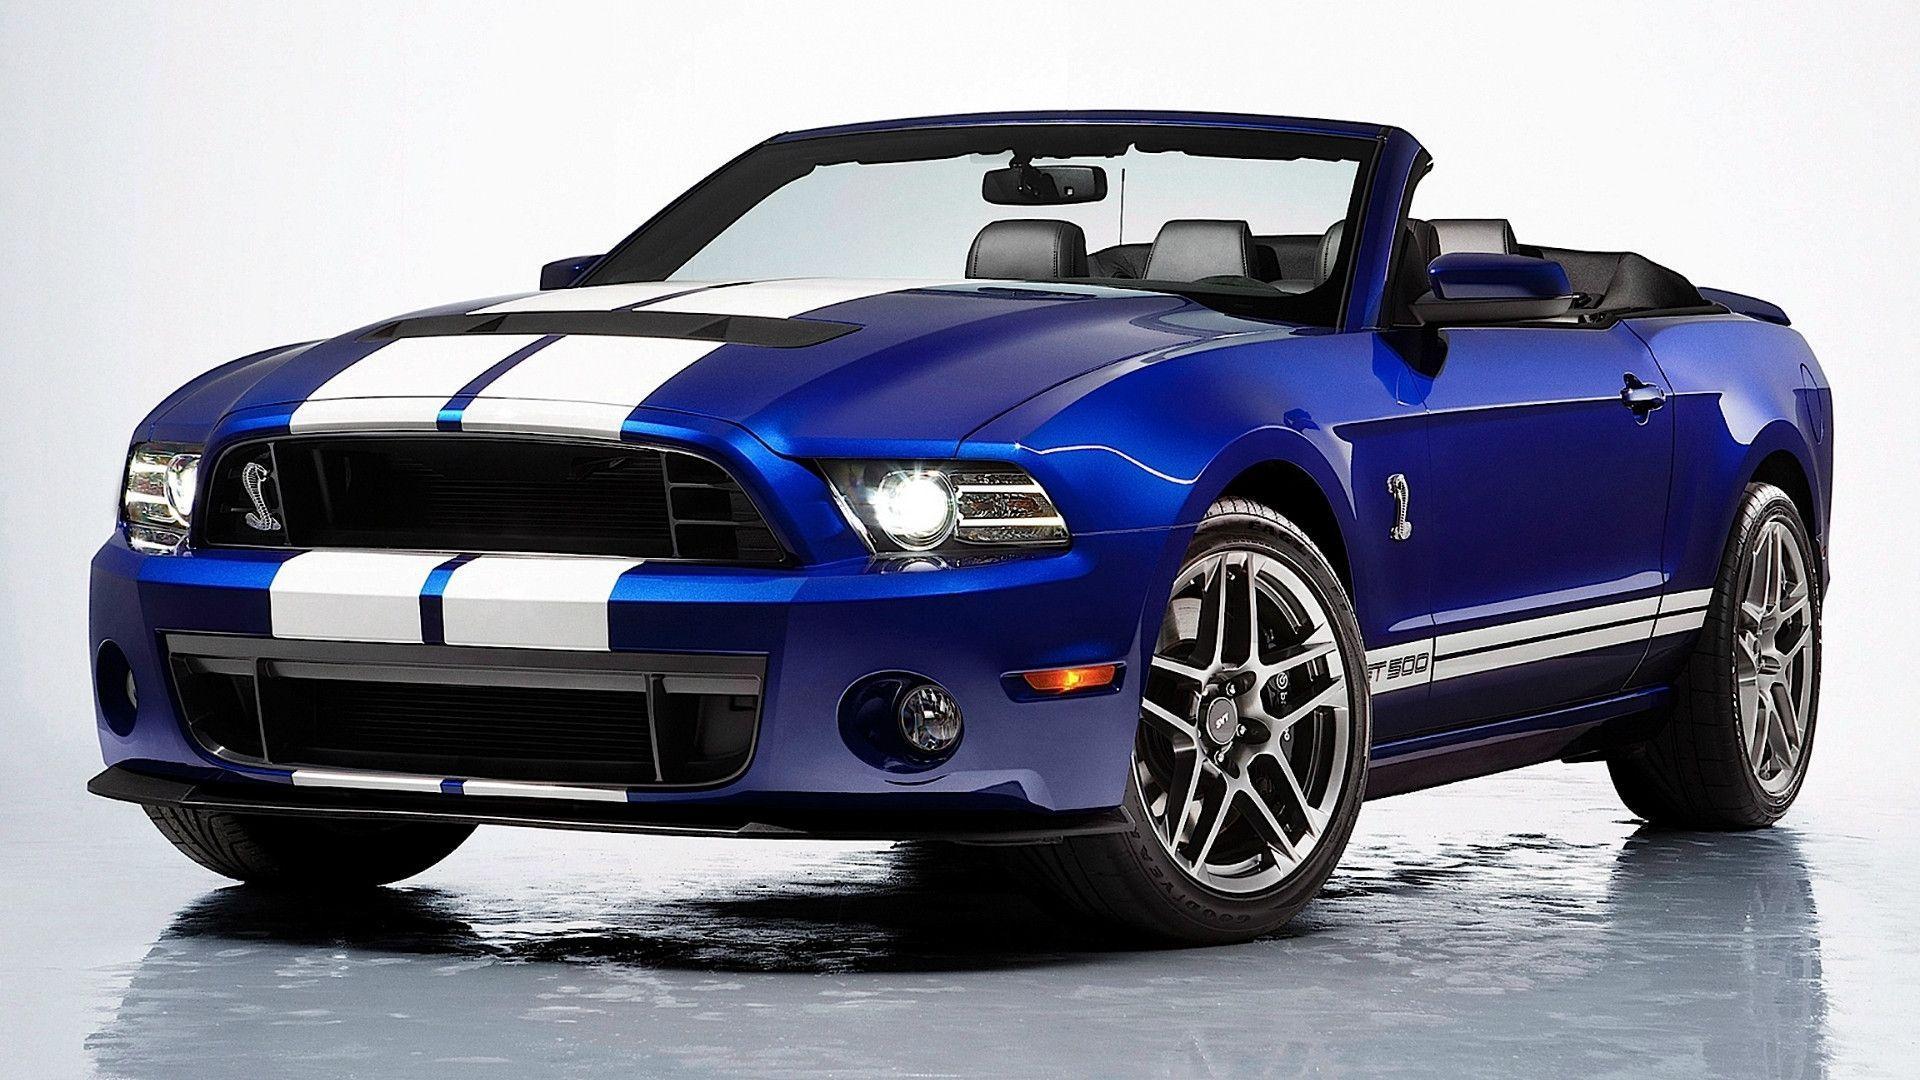 Download Ford Mustang Shelby Gt Nice Cars Wallpaper. Full HD